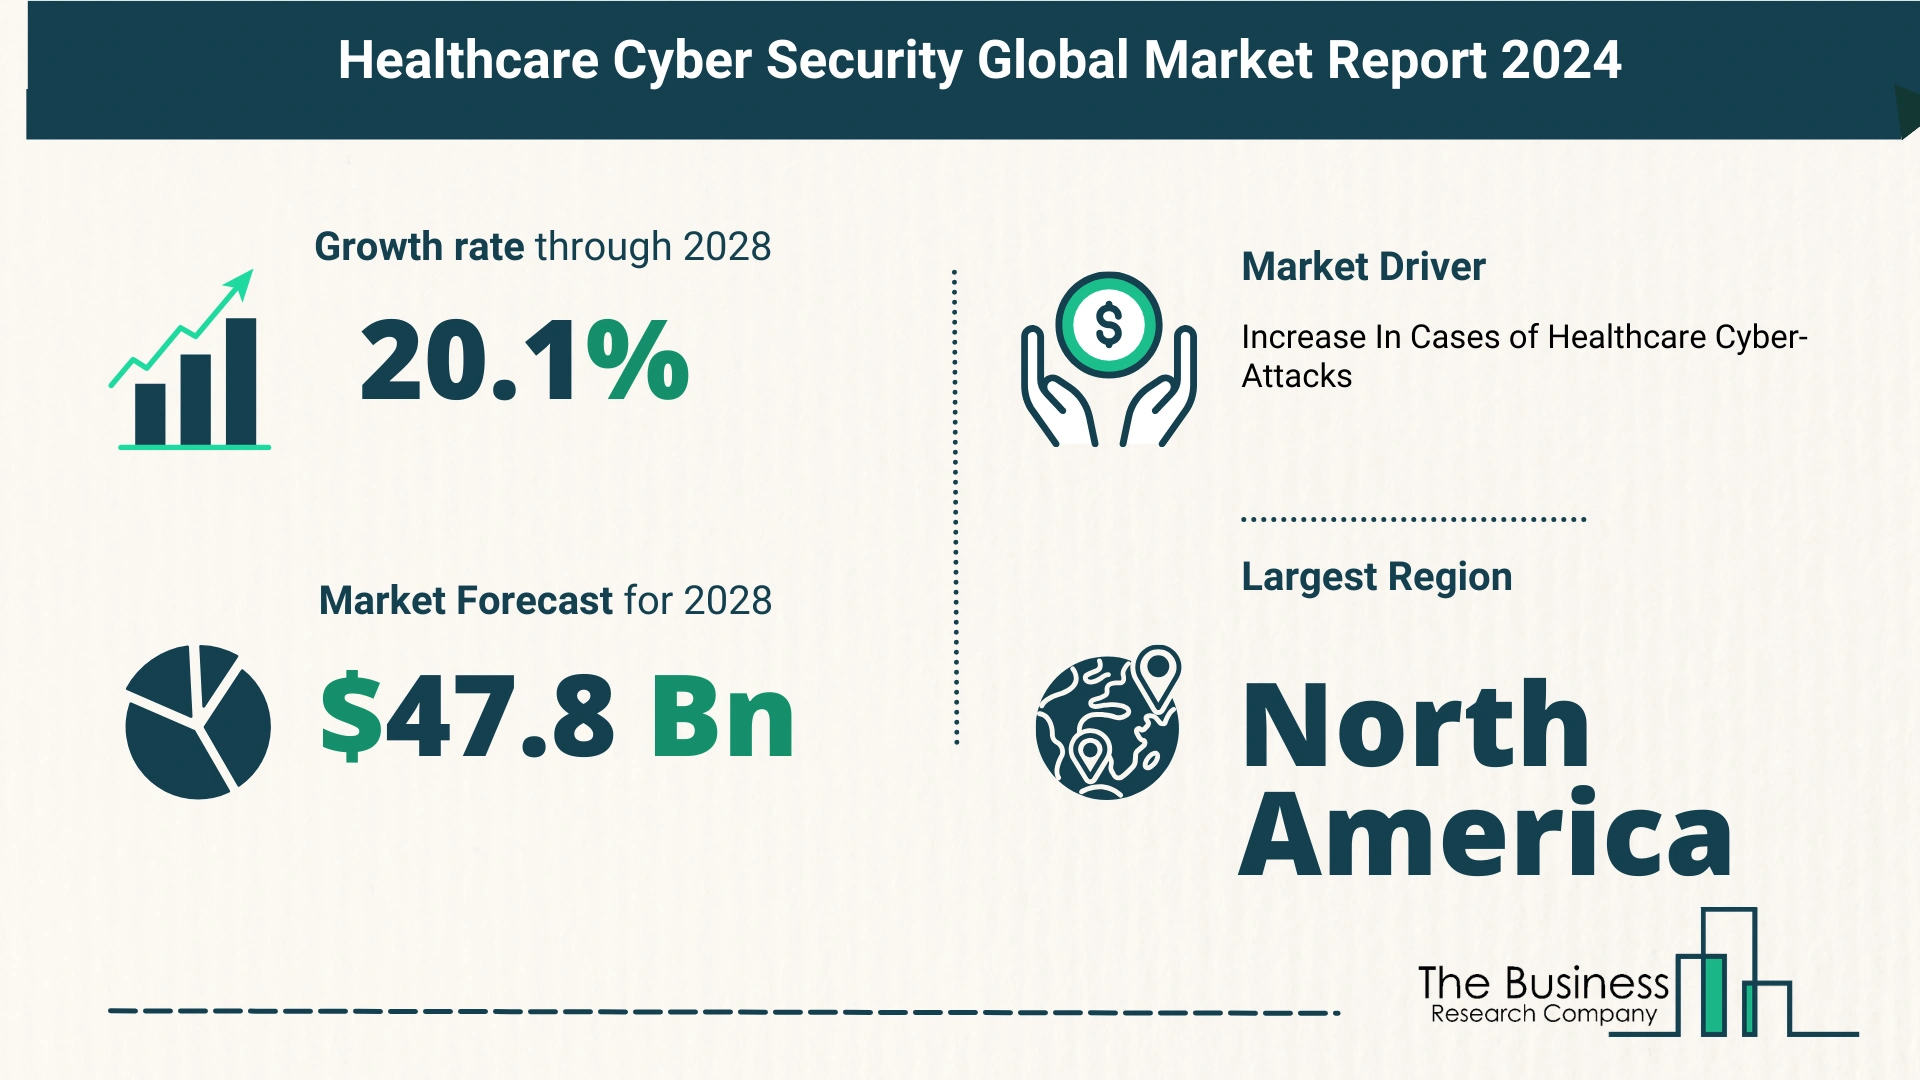 Key Takeaways From The Global Healthcare Cyber Security Market Forecast 2024